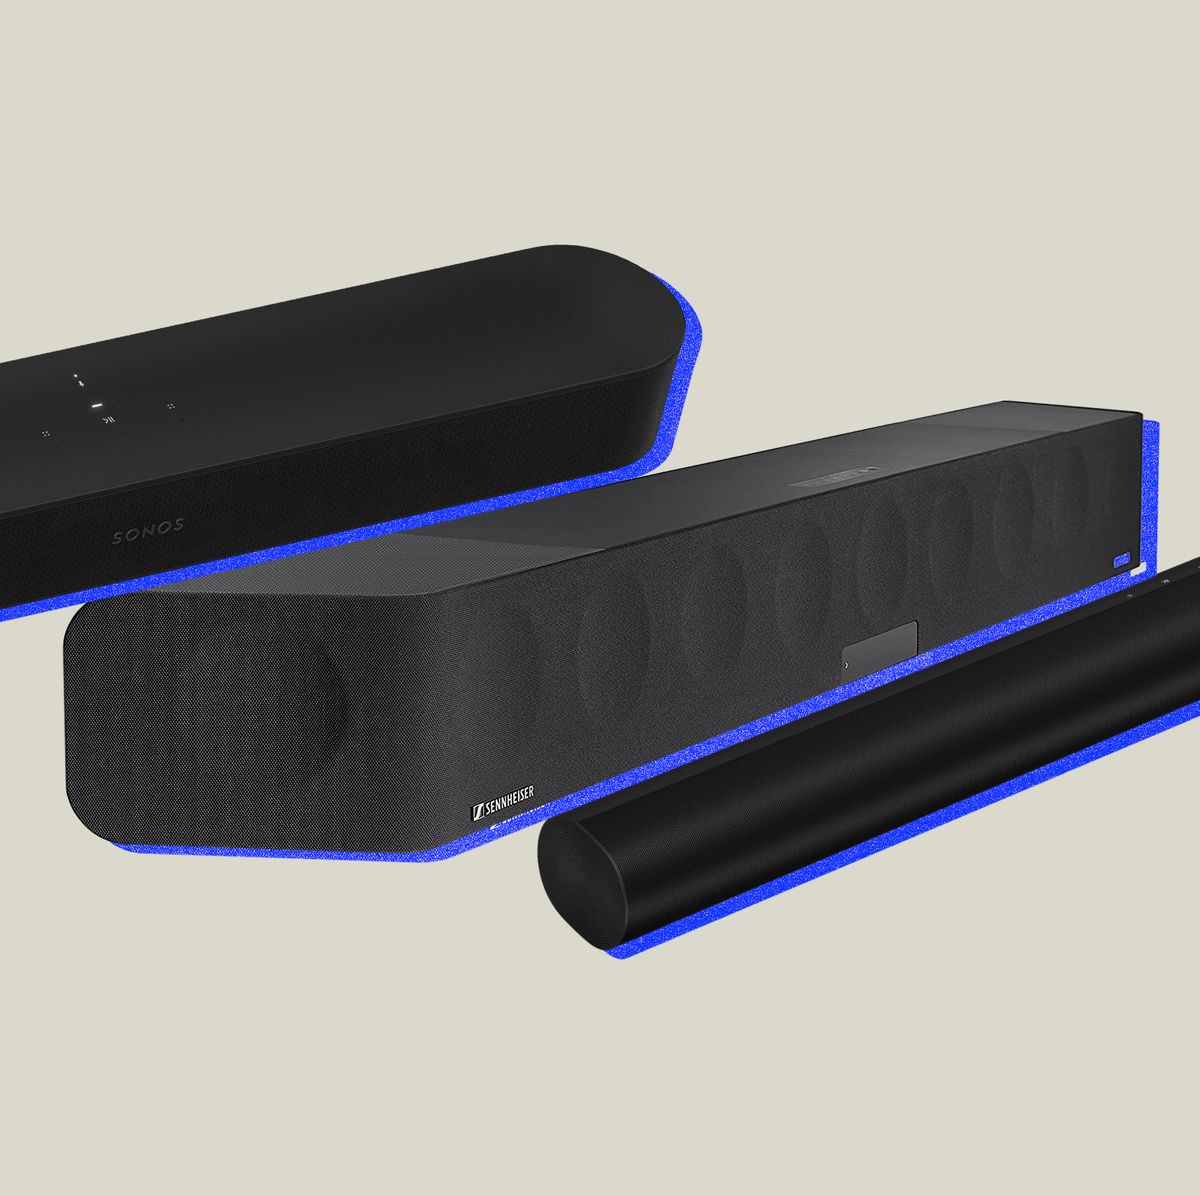 The Best Soundbars You Can Buy